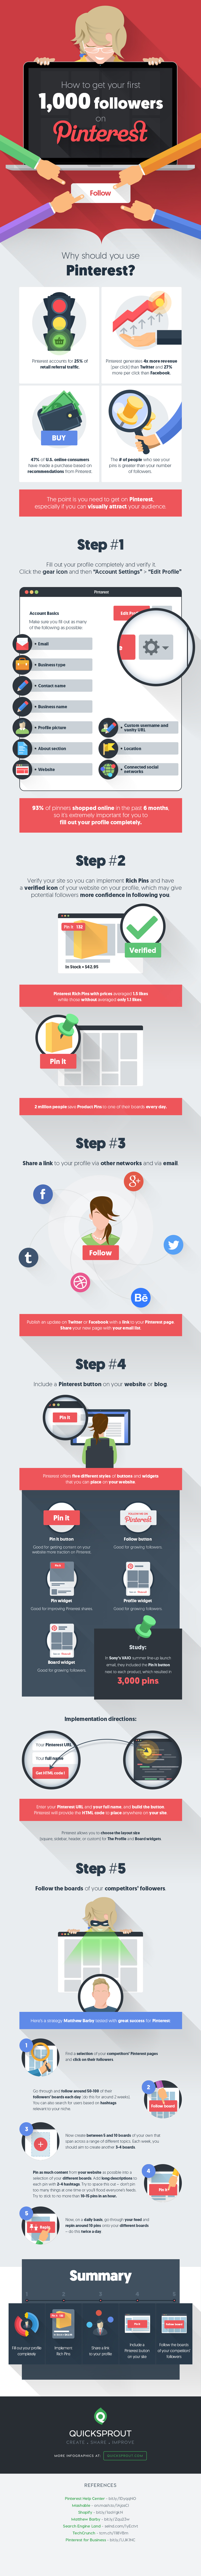 How to Get Your First 1000 Followers on Pinterest